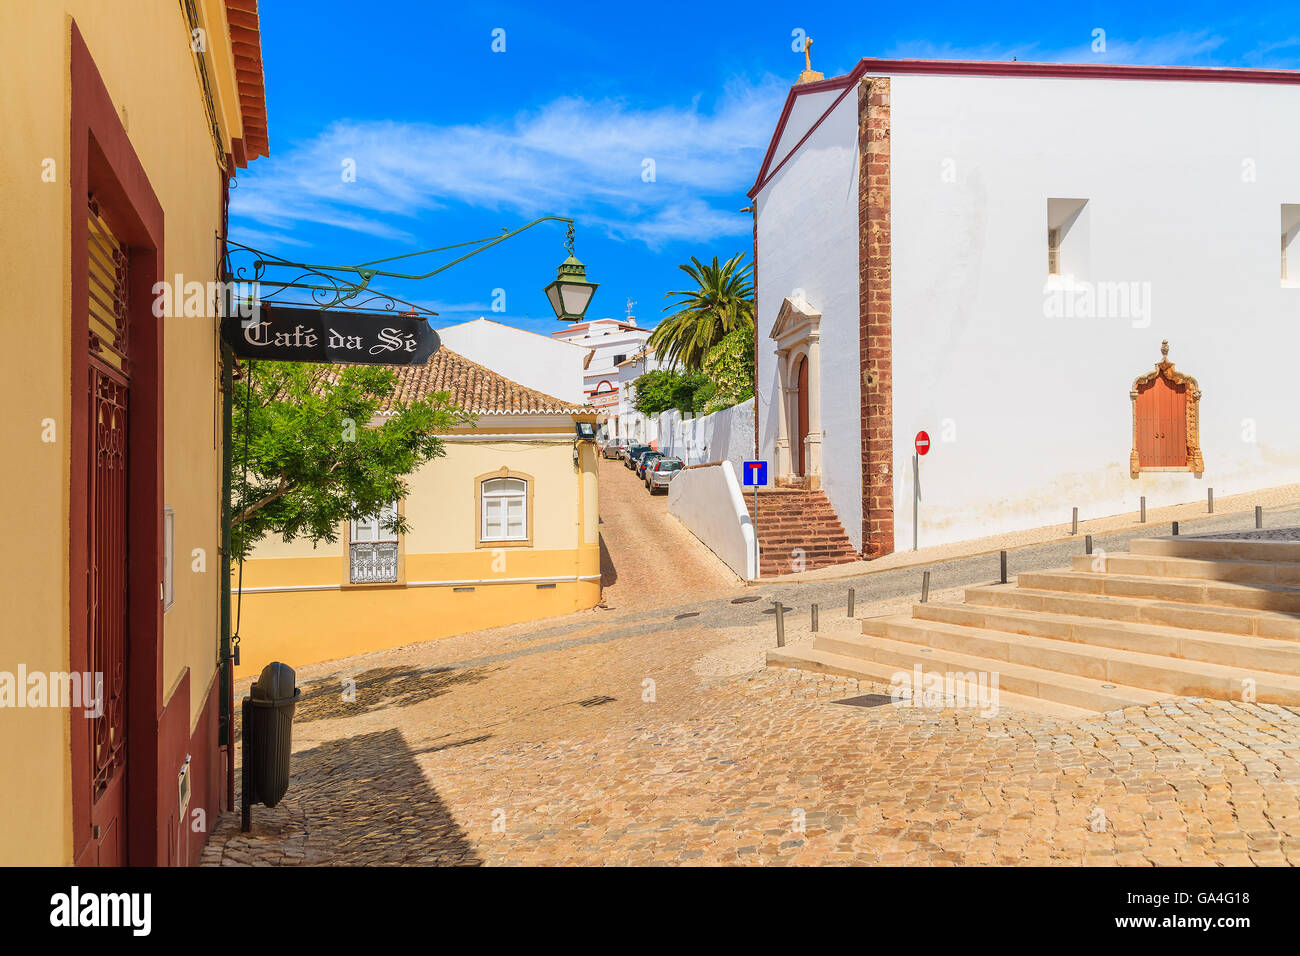 SILVES TOWN, PORTUGAL - MAY 17, 2015: Typical houses in old town of Silves, Algarve region, Portugal. Silves is famous historic town with medieval castle which is best preserved in the whole region. Stock Photo